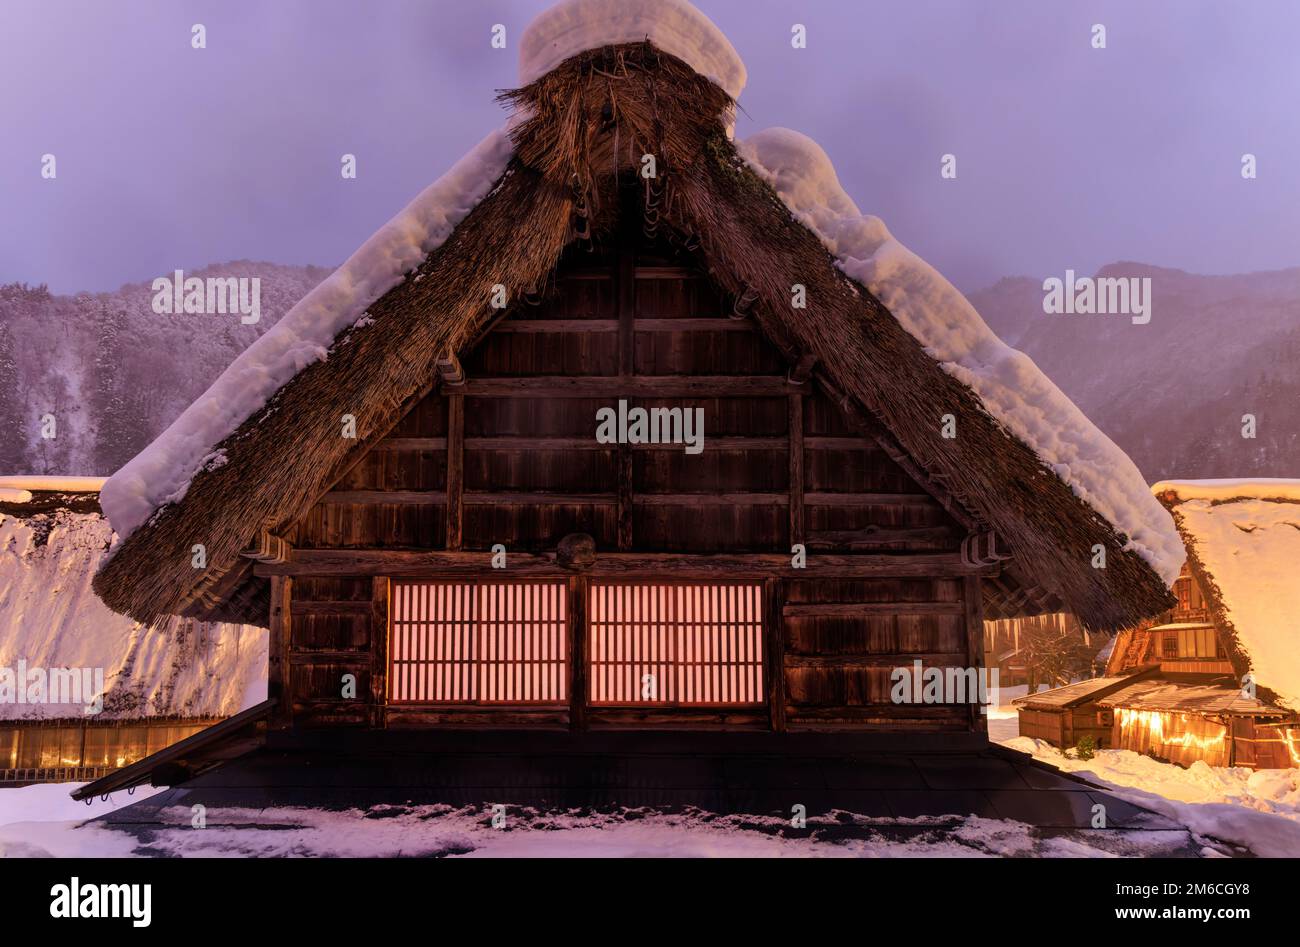 Snow covered thatched roof on traditional Japanese farmhouse at dawn Stock Photo